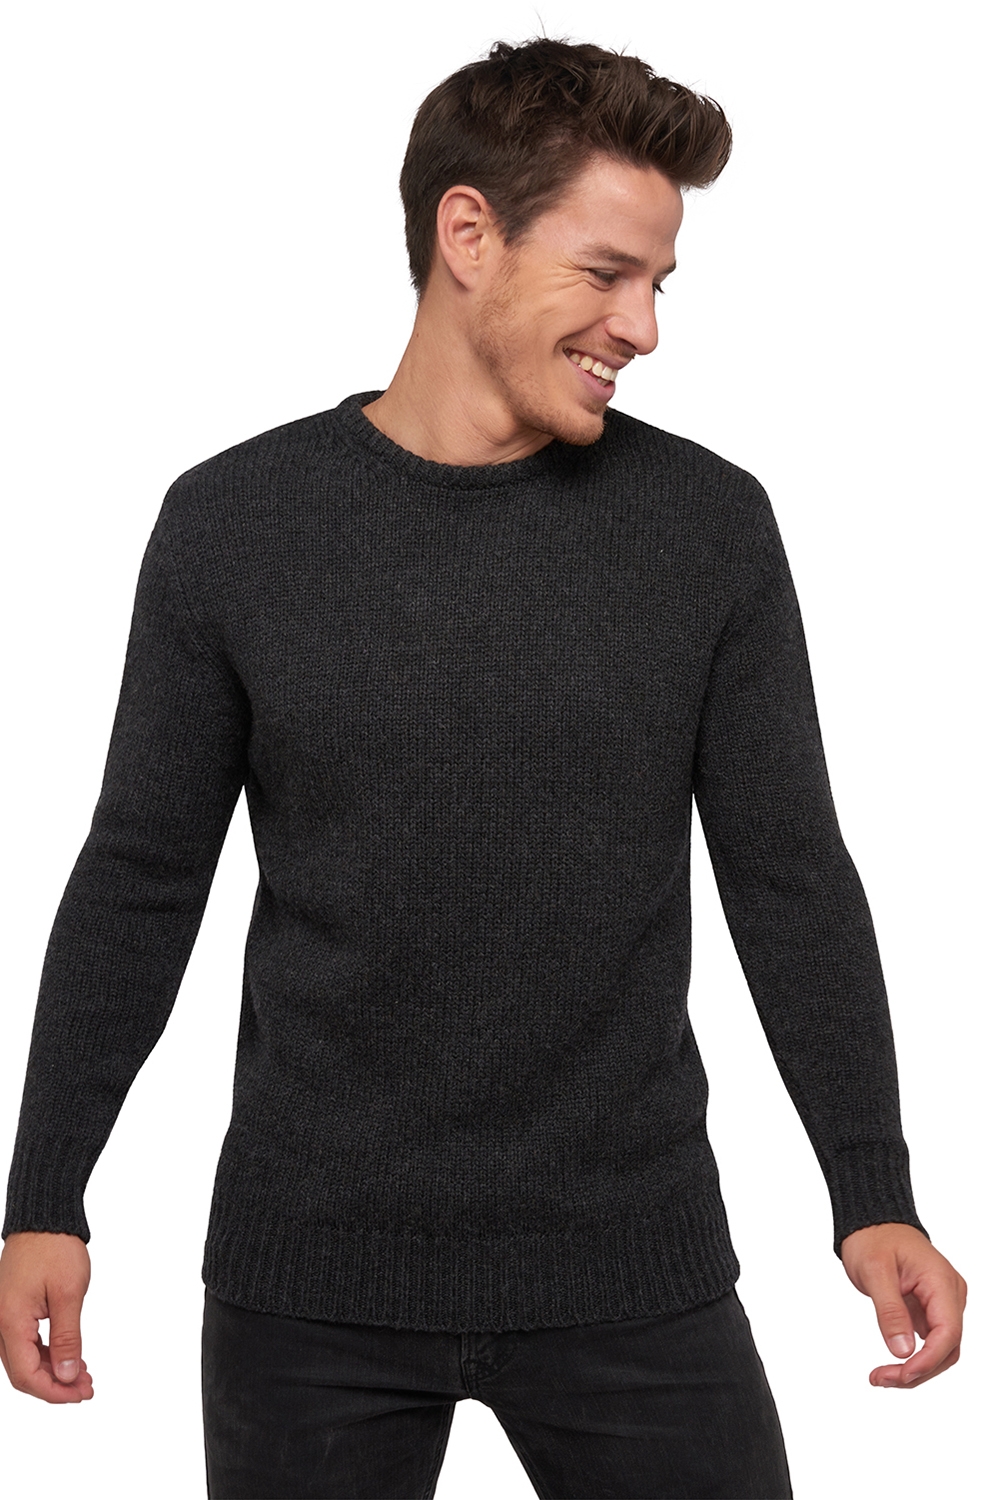 Chameau pull homme col rond cole anthracite 3xl